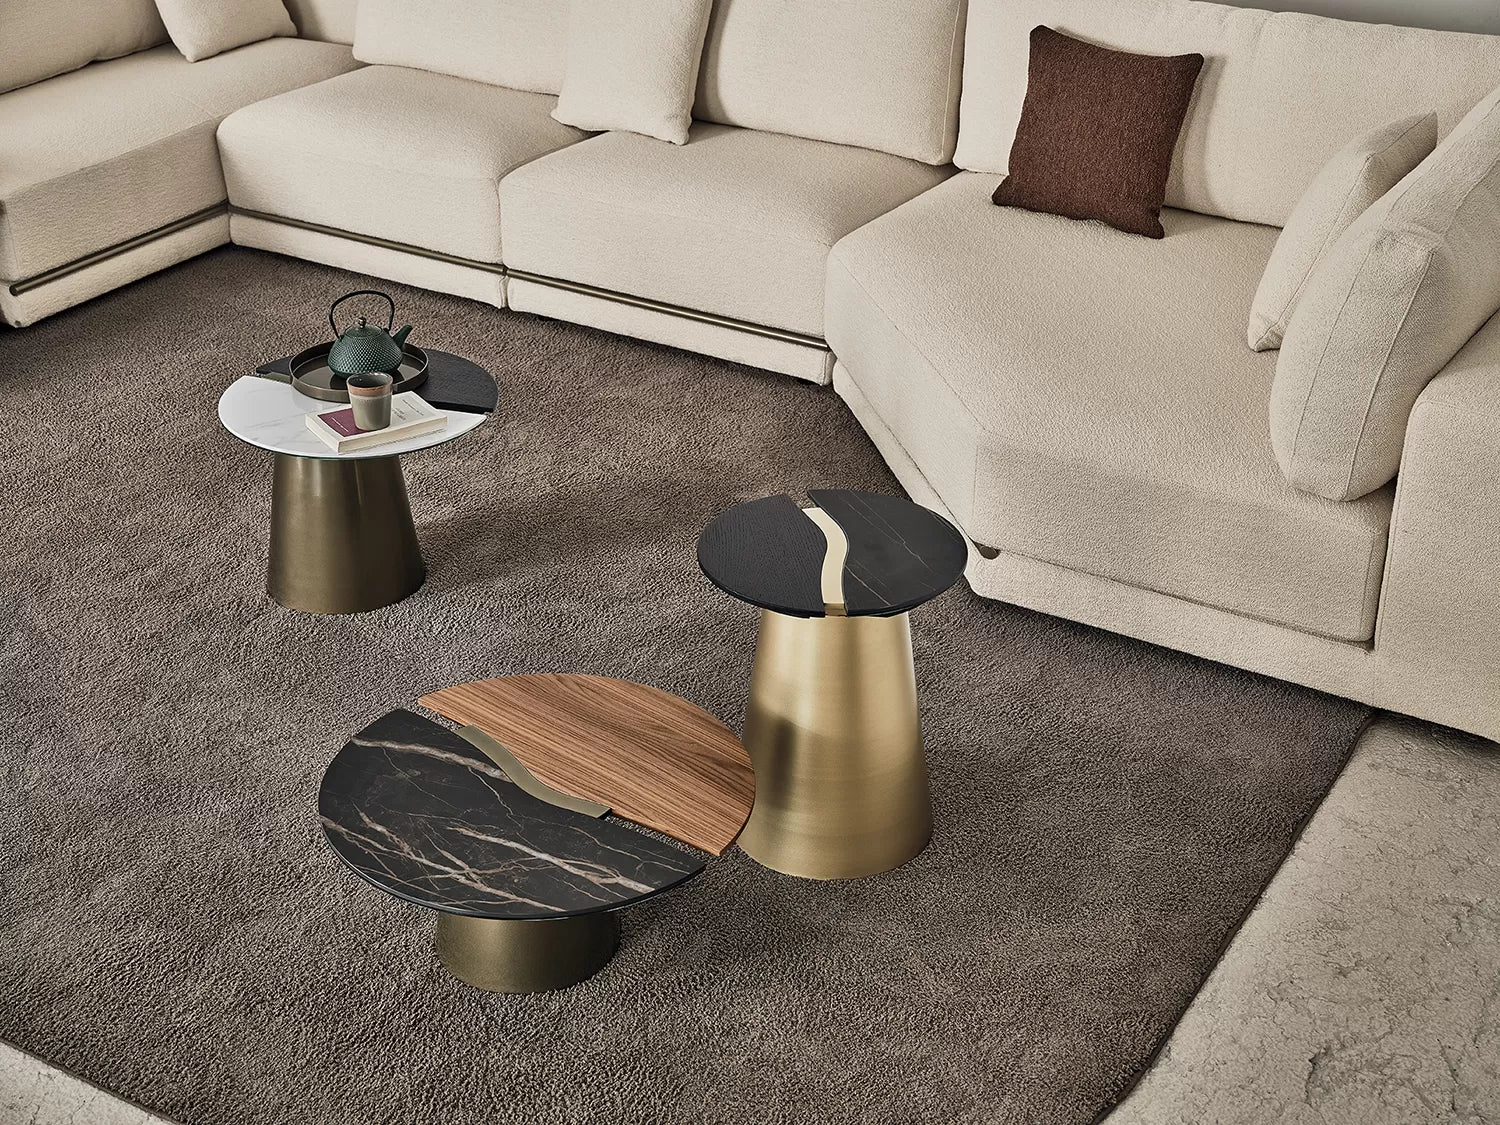 Yang Coffee table with metal frame and decorative details